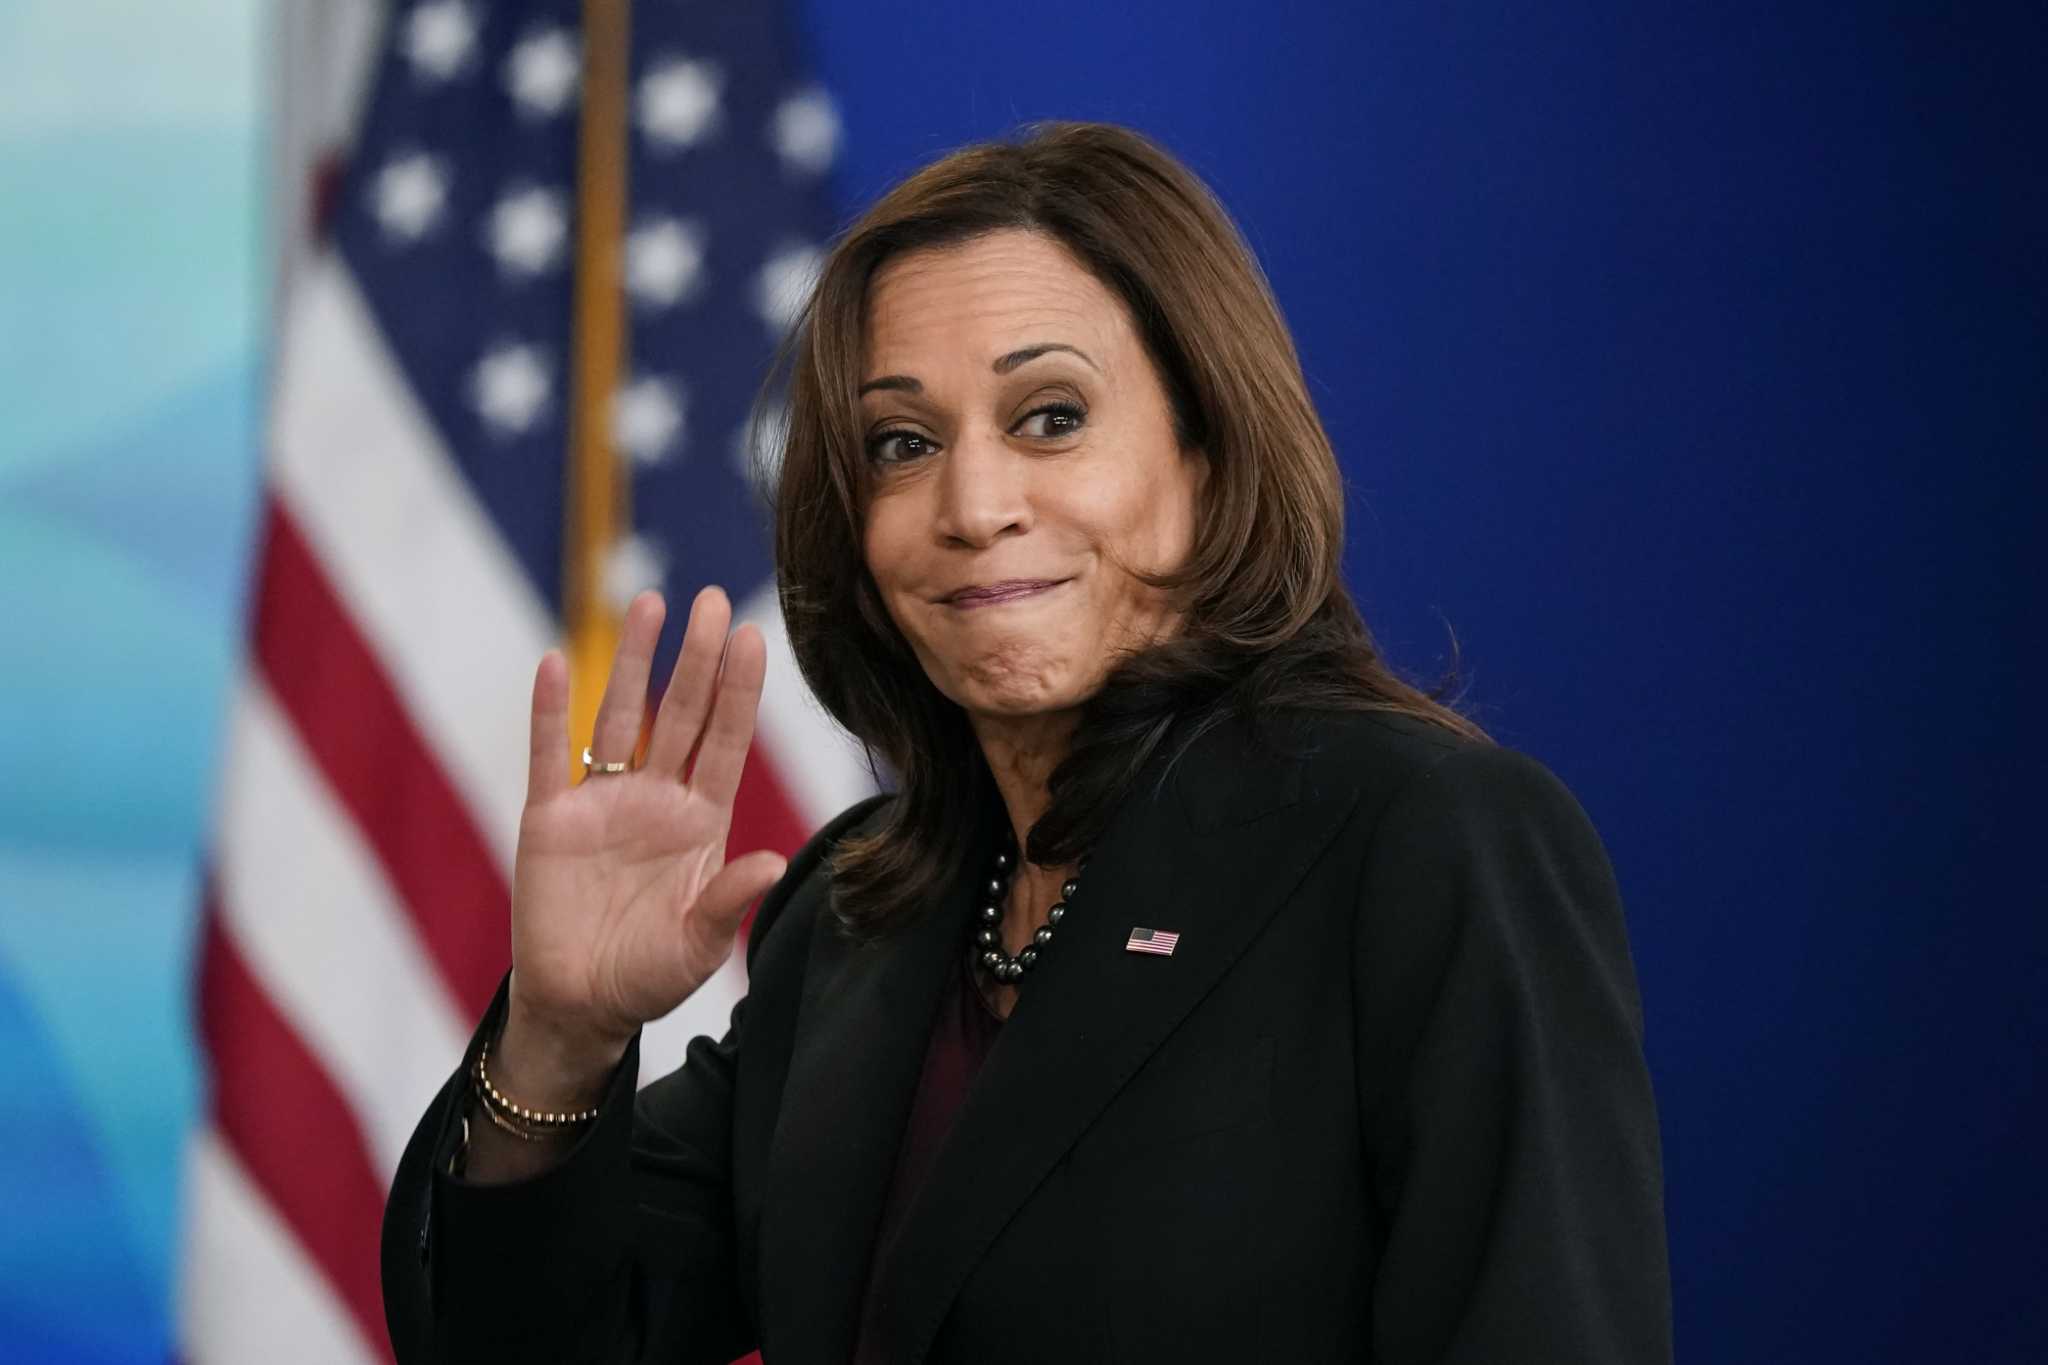 Kamala Harris' Comedy Central interview turns awkward then contentious